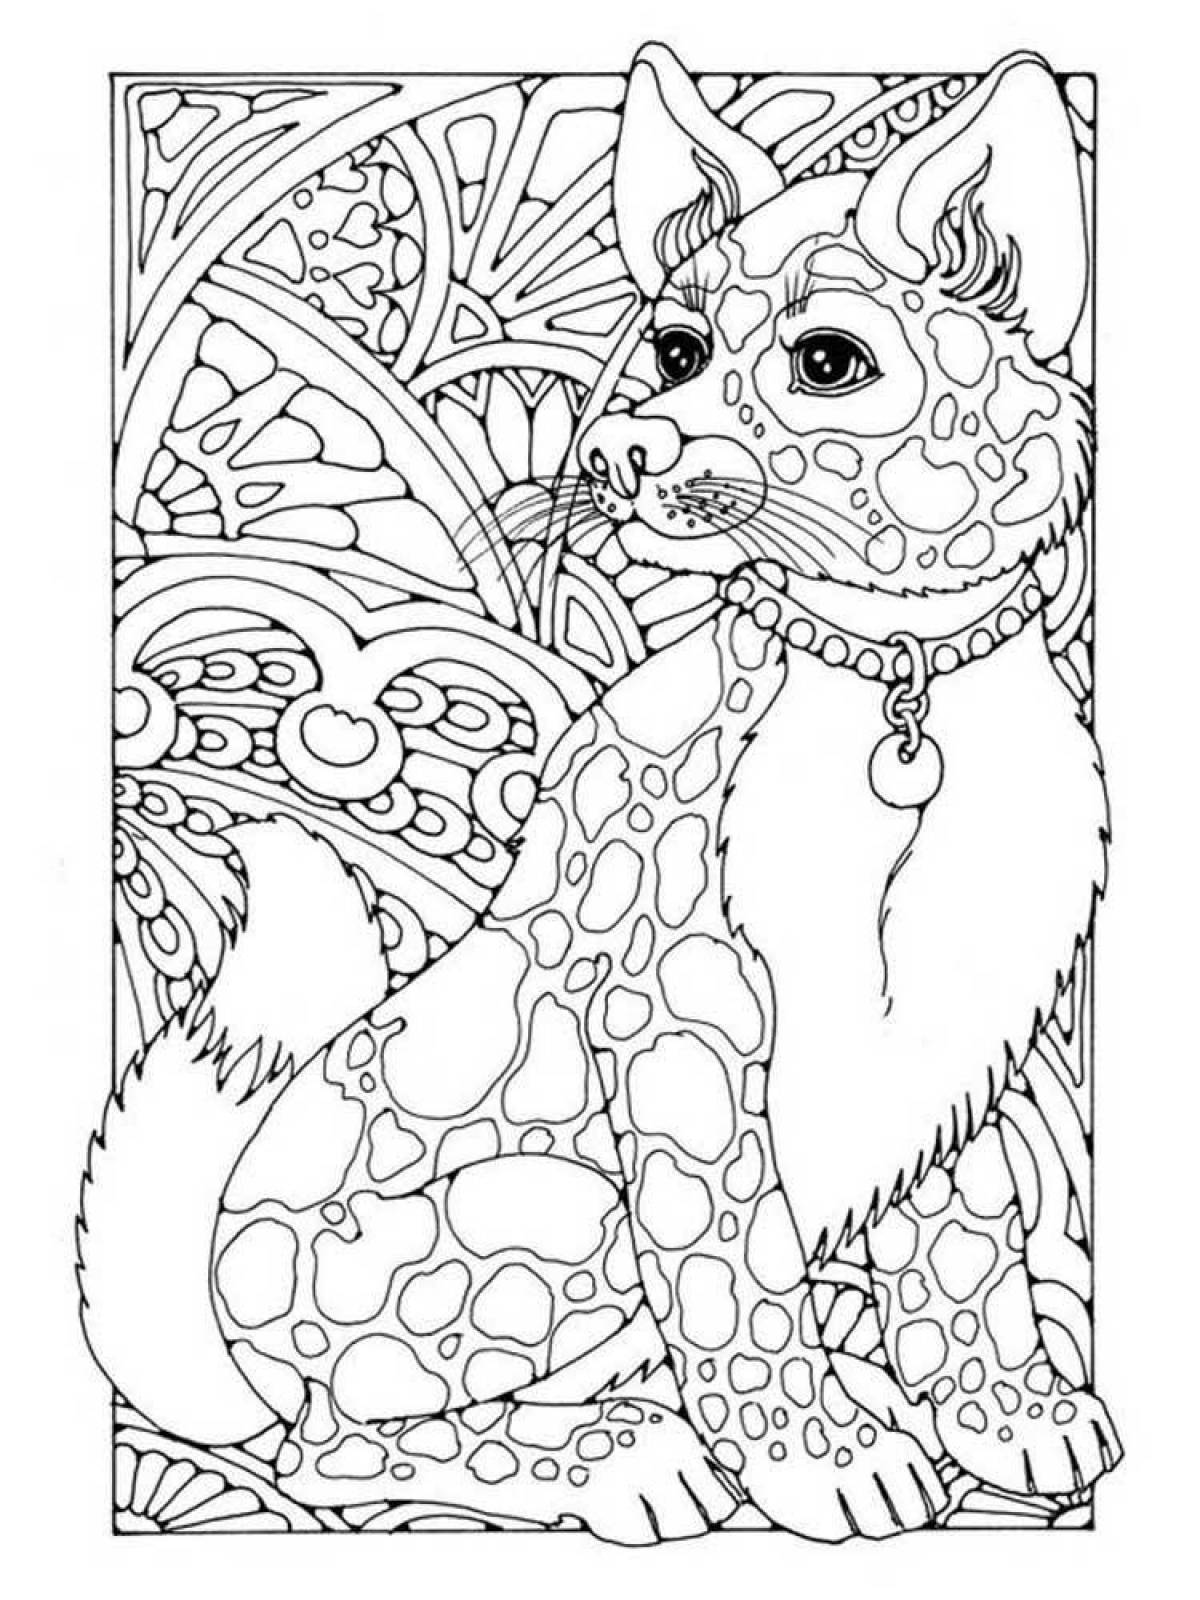 Fancy coloring for girls 12 years old animals